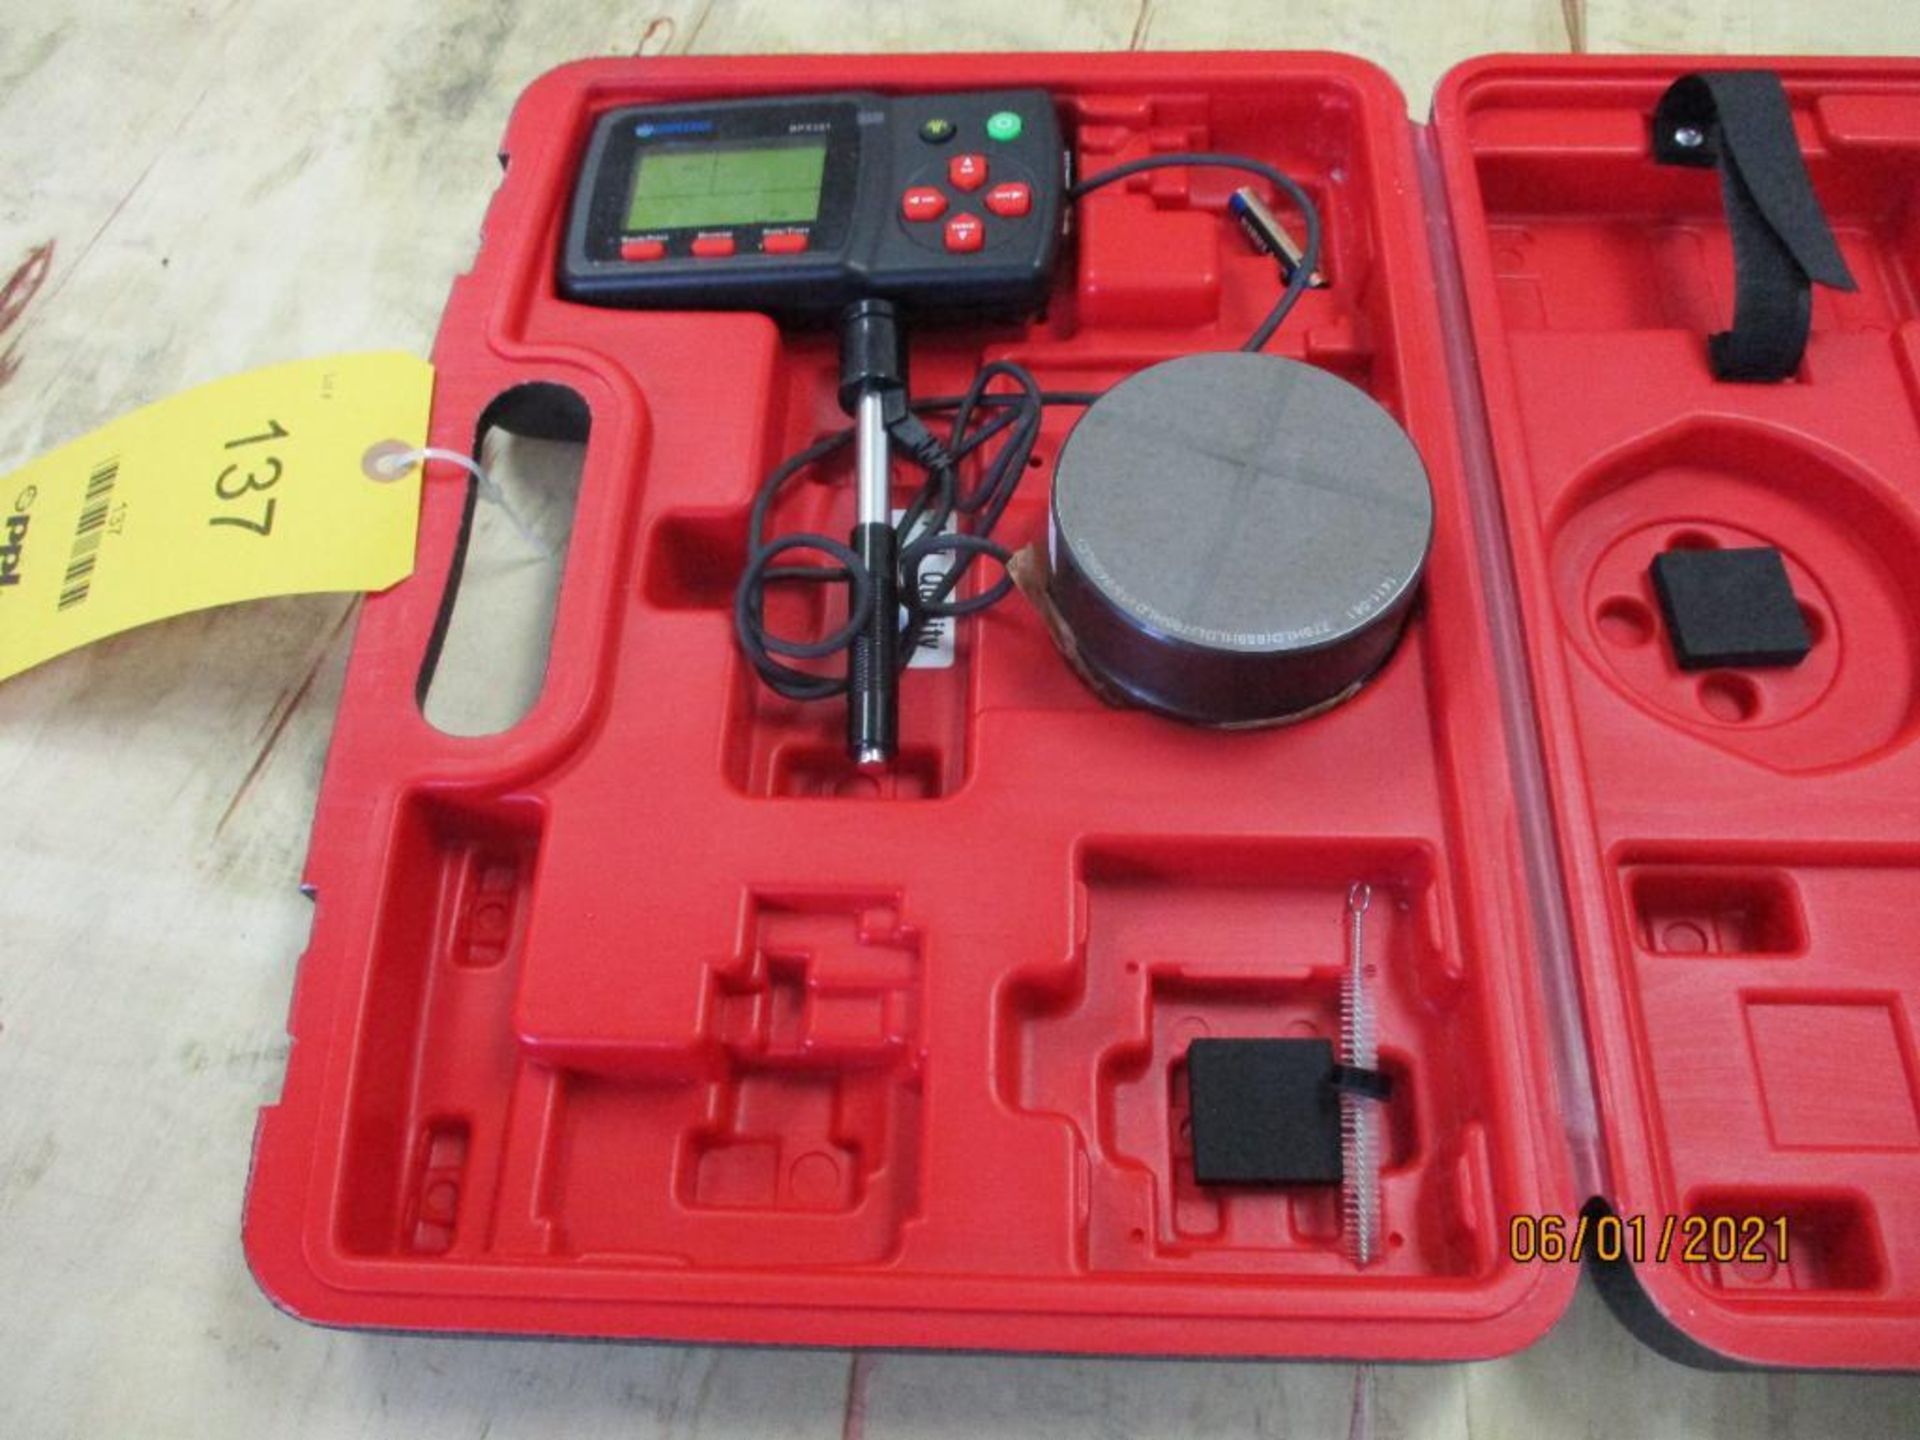 Cimetrix Portable Hardness Tester (All inspection eq. is like New and Mostly Certified)